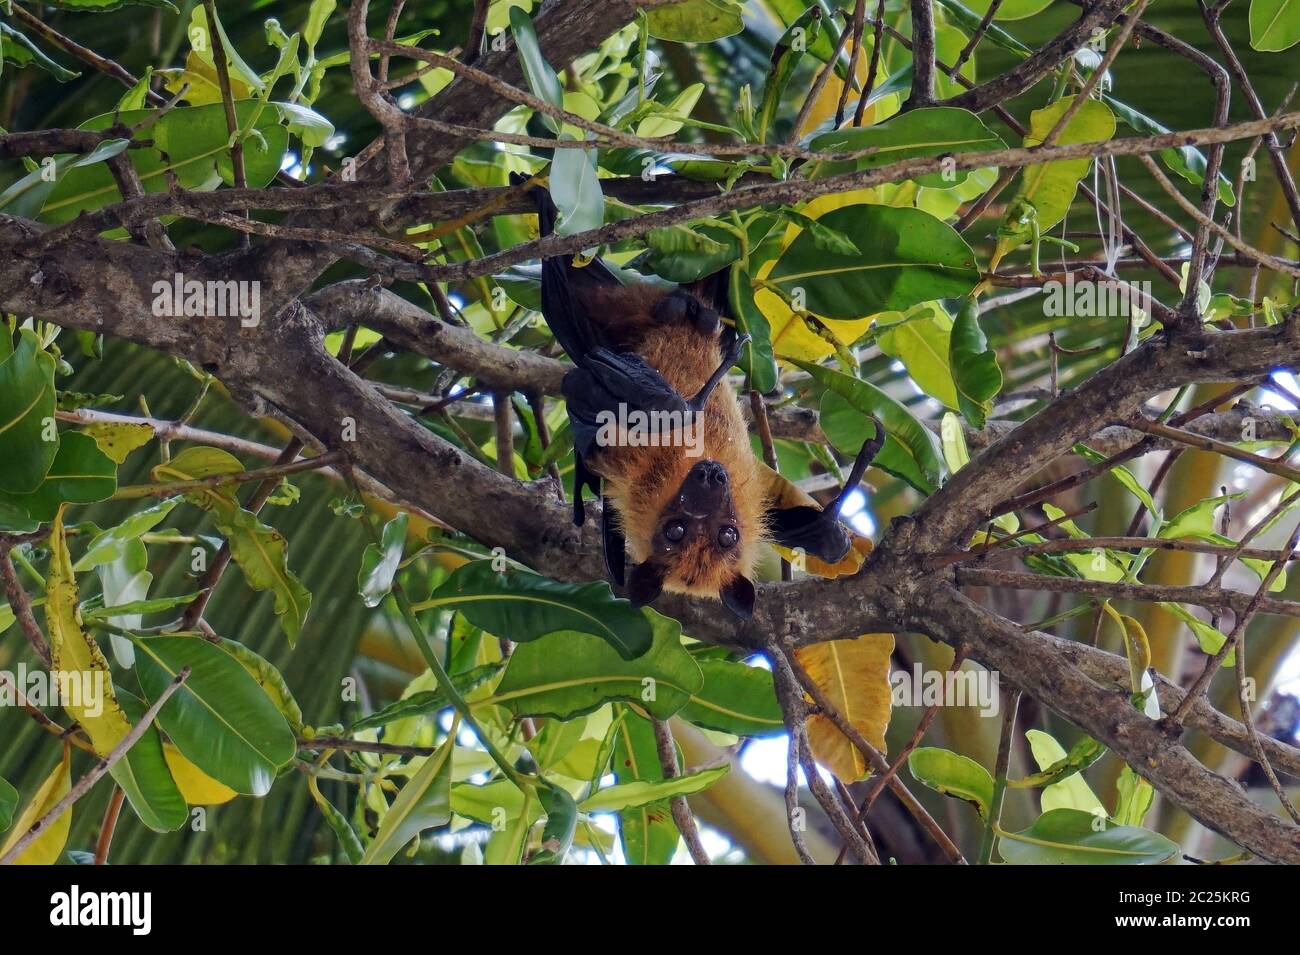 A male flying fox hangs upside down in a tree in Asia. A flying dog in a tree Stock Photo